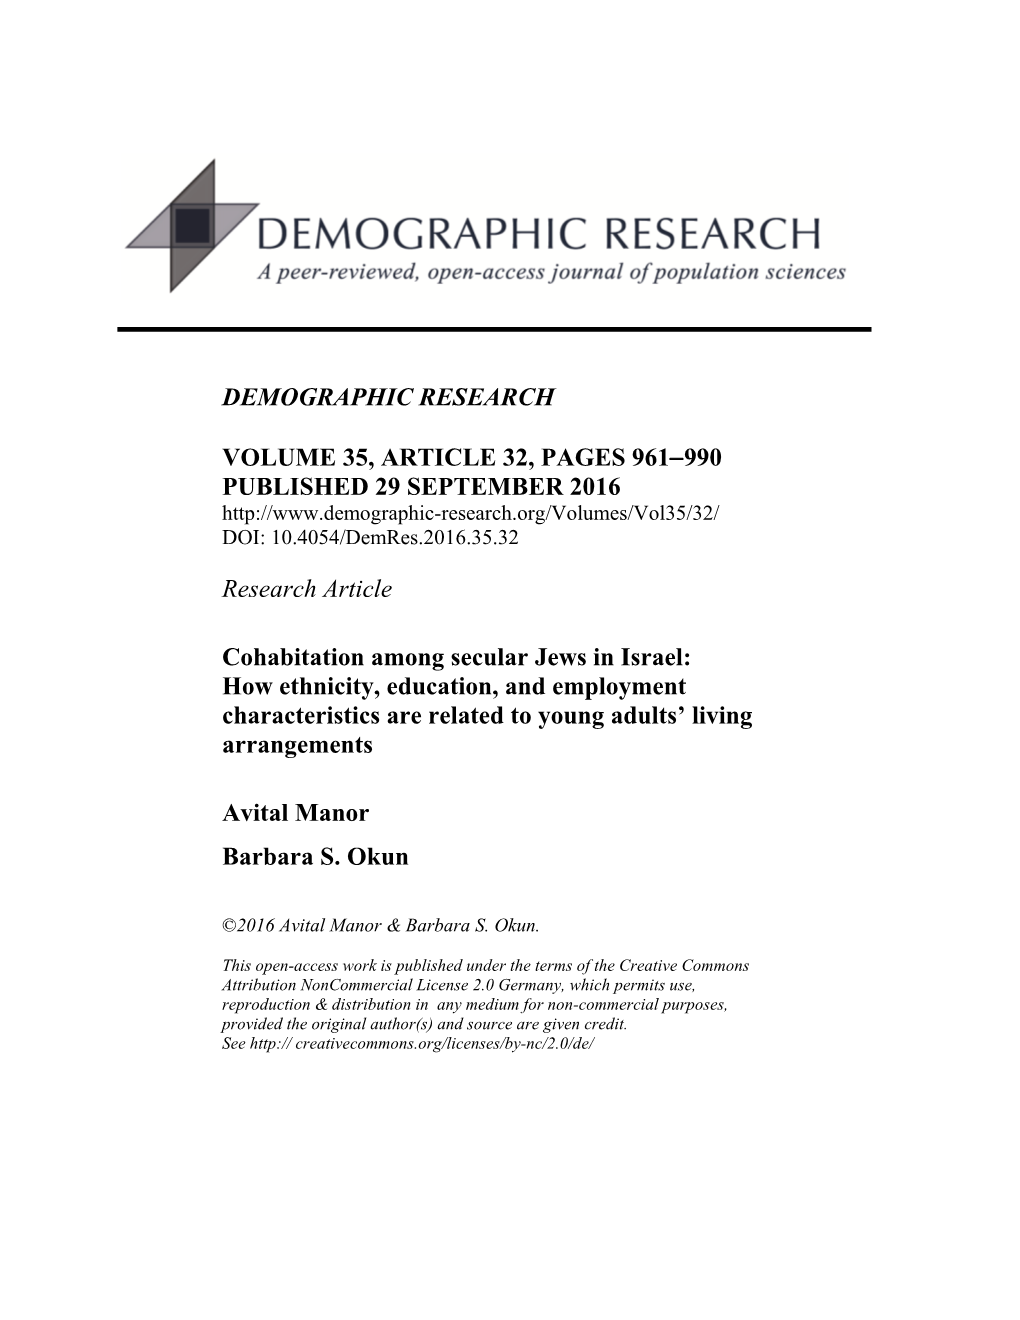 Cohabitation Among Secular Jews in Israel: How Ethnicity, Education, and Employment Characteristics Are Related to Young Adults’ Living Arrangements